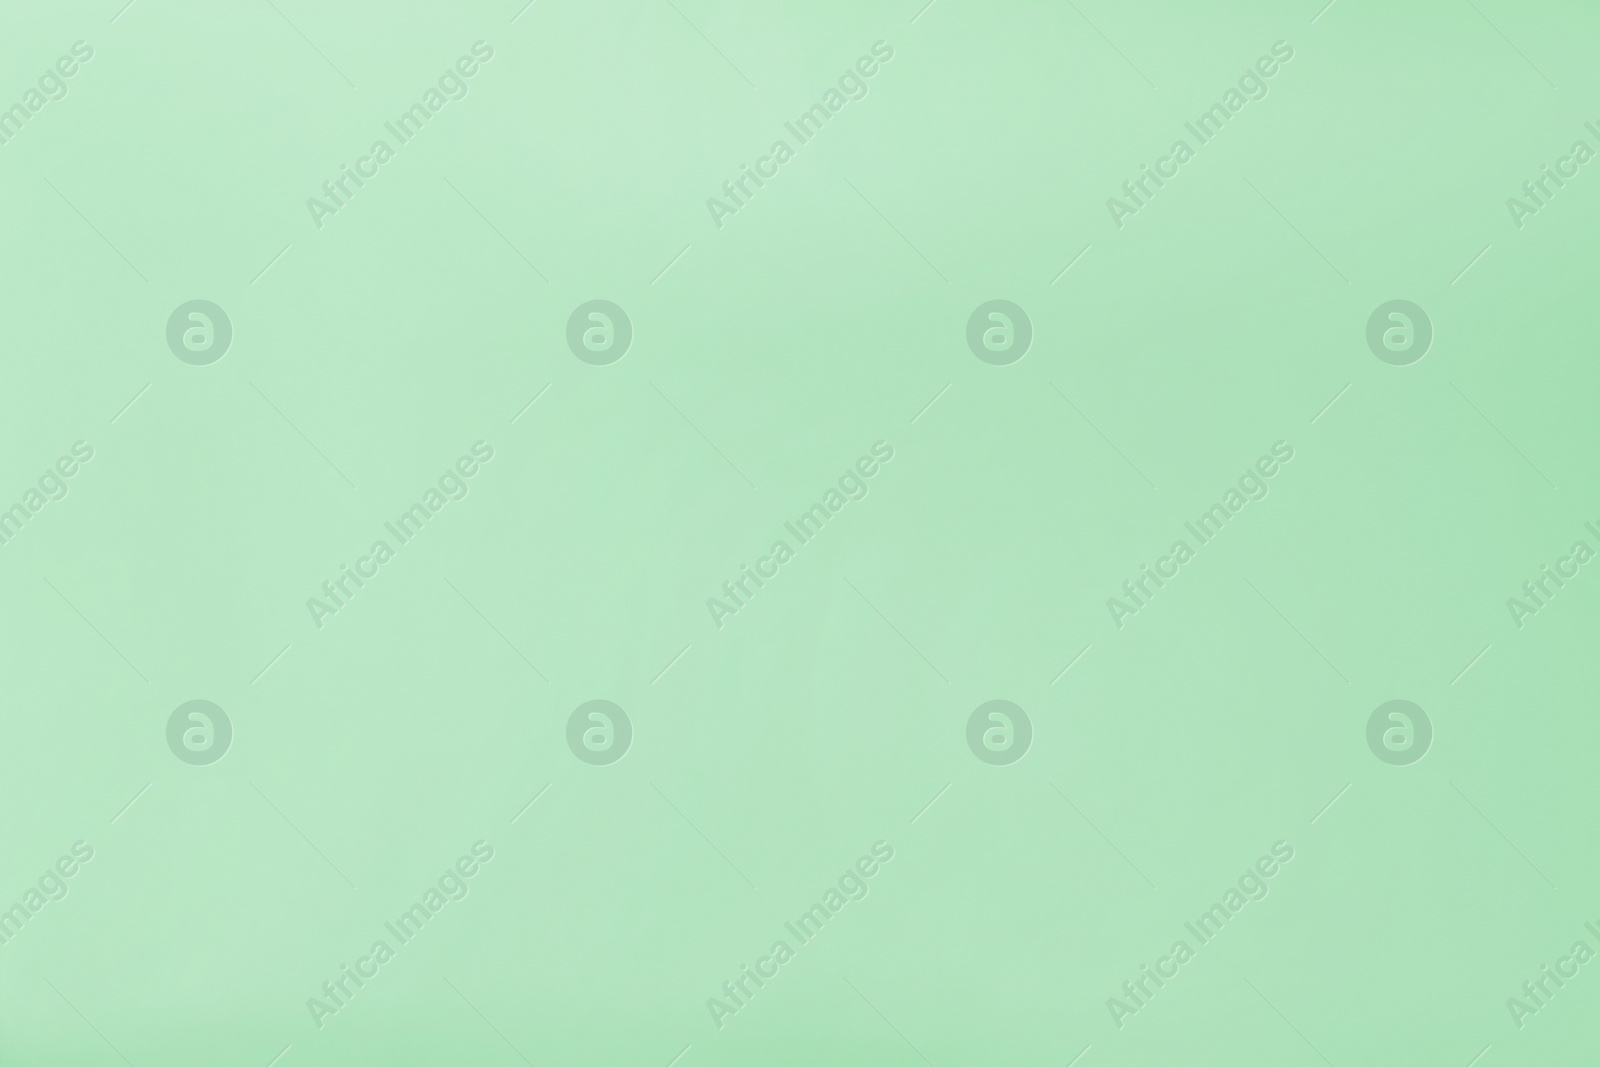 Image of Texture of wall as background. Image toned in mint color 